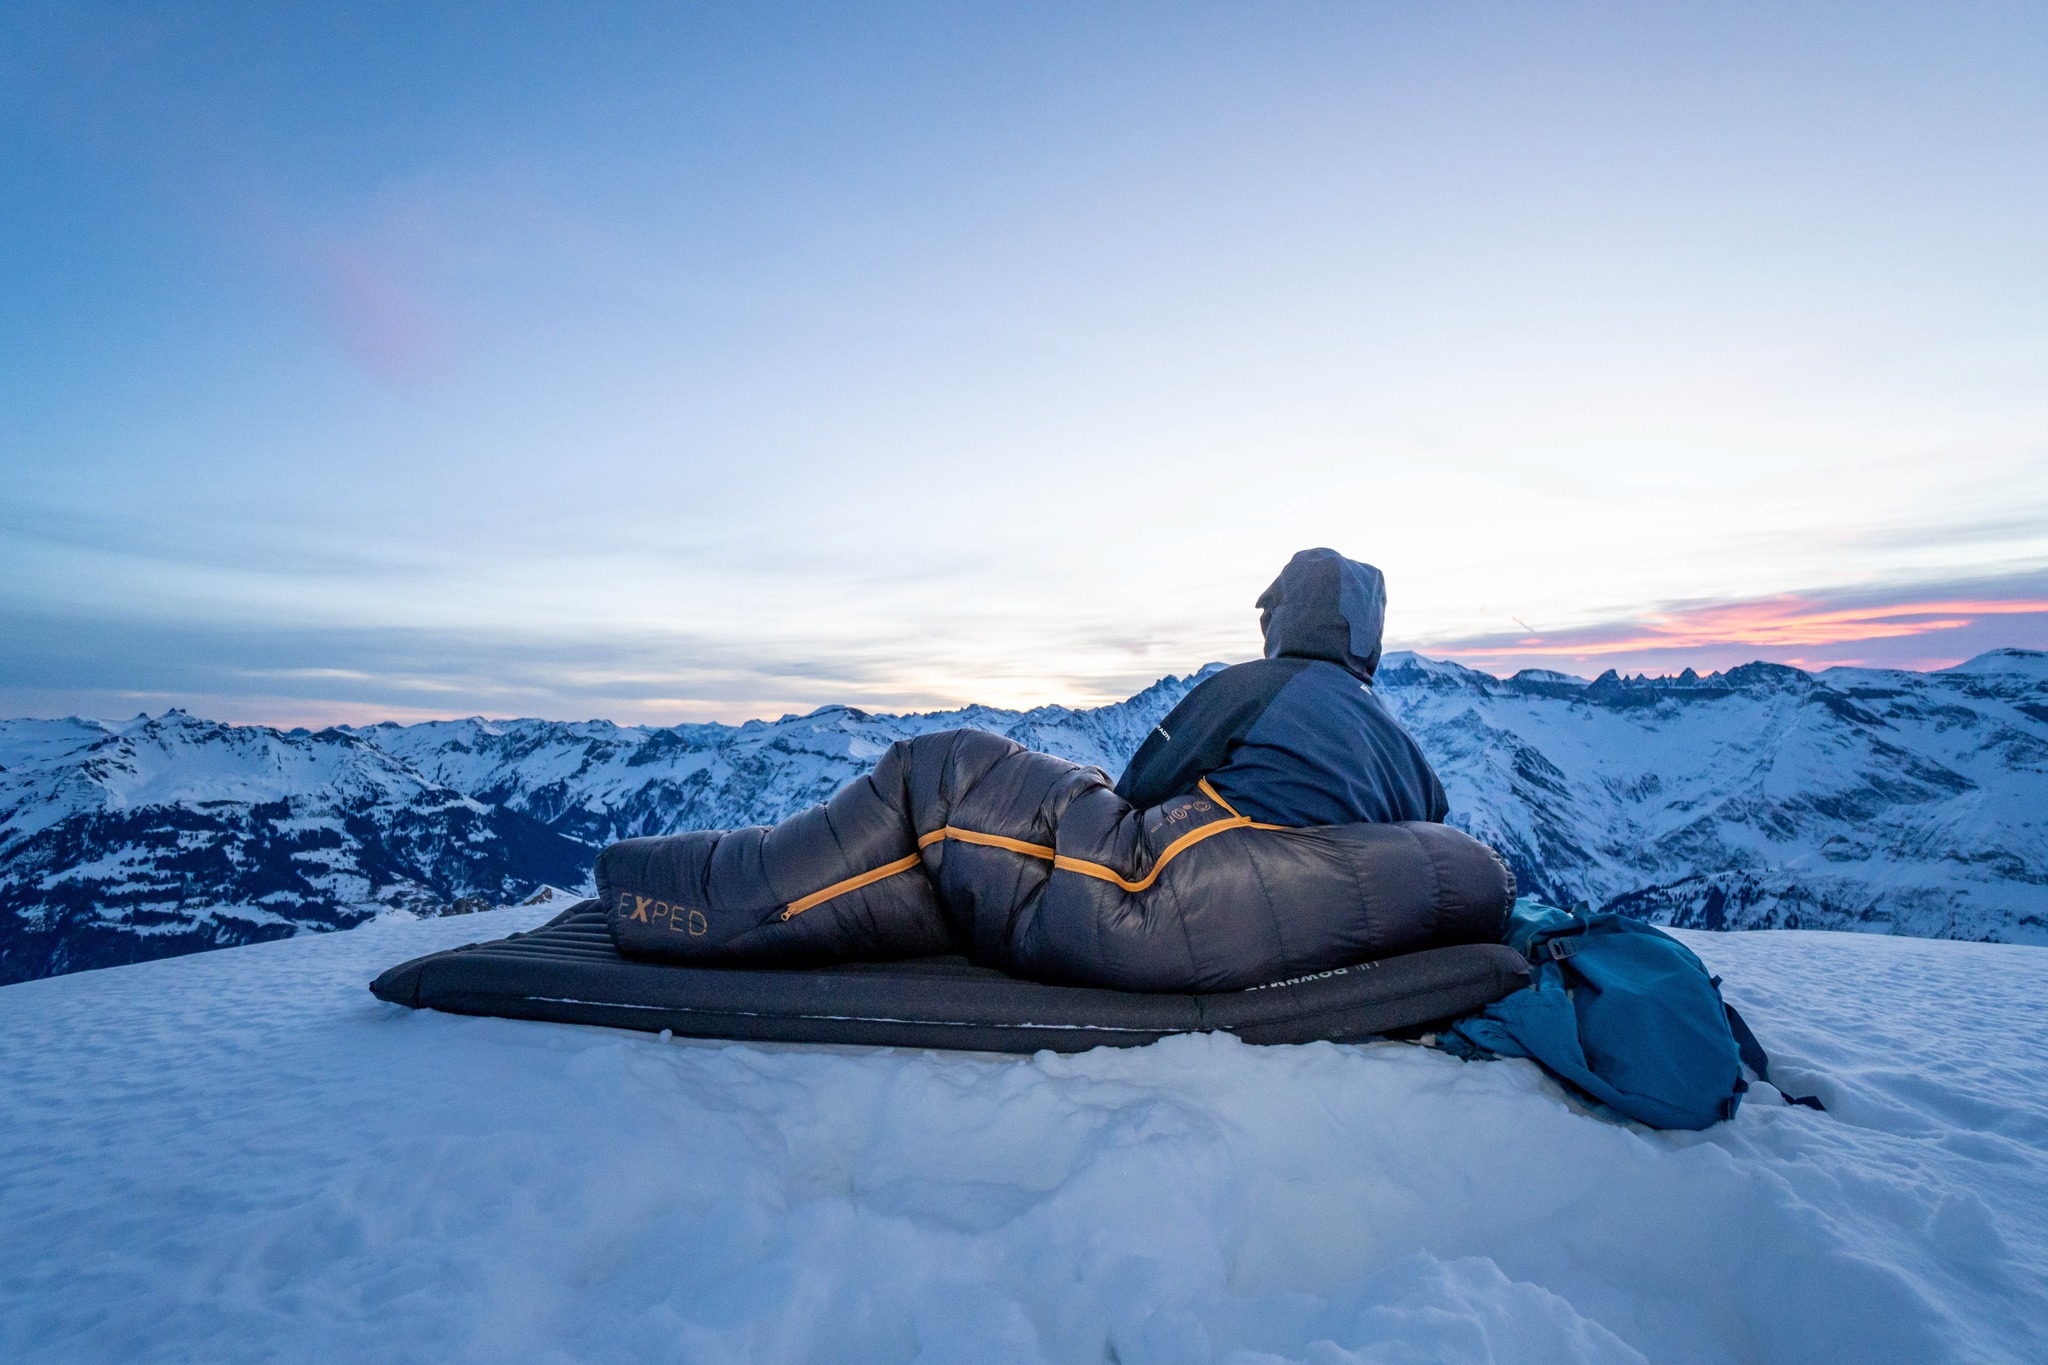 What is r value? Your sleeping pad's R-Value is important for keeping you warm while backpacking.